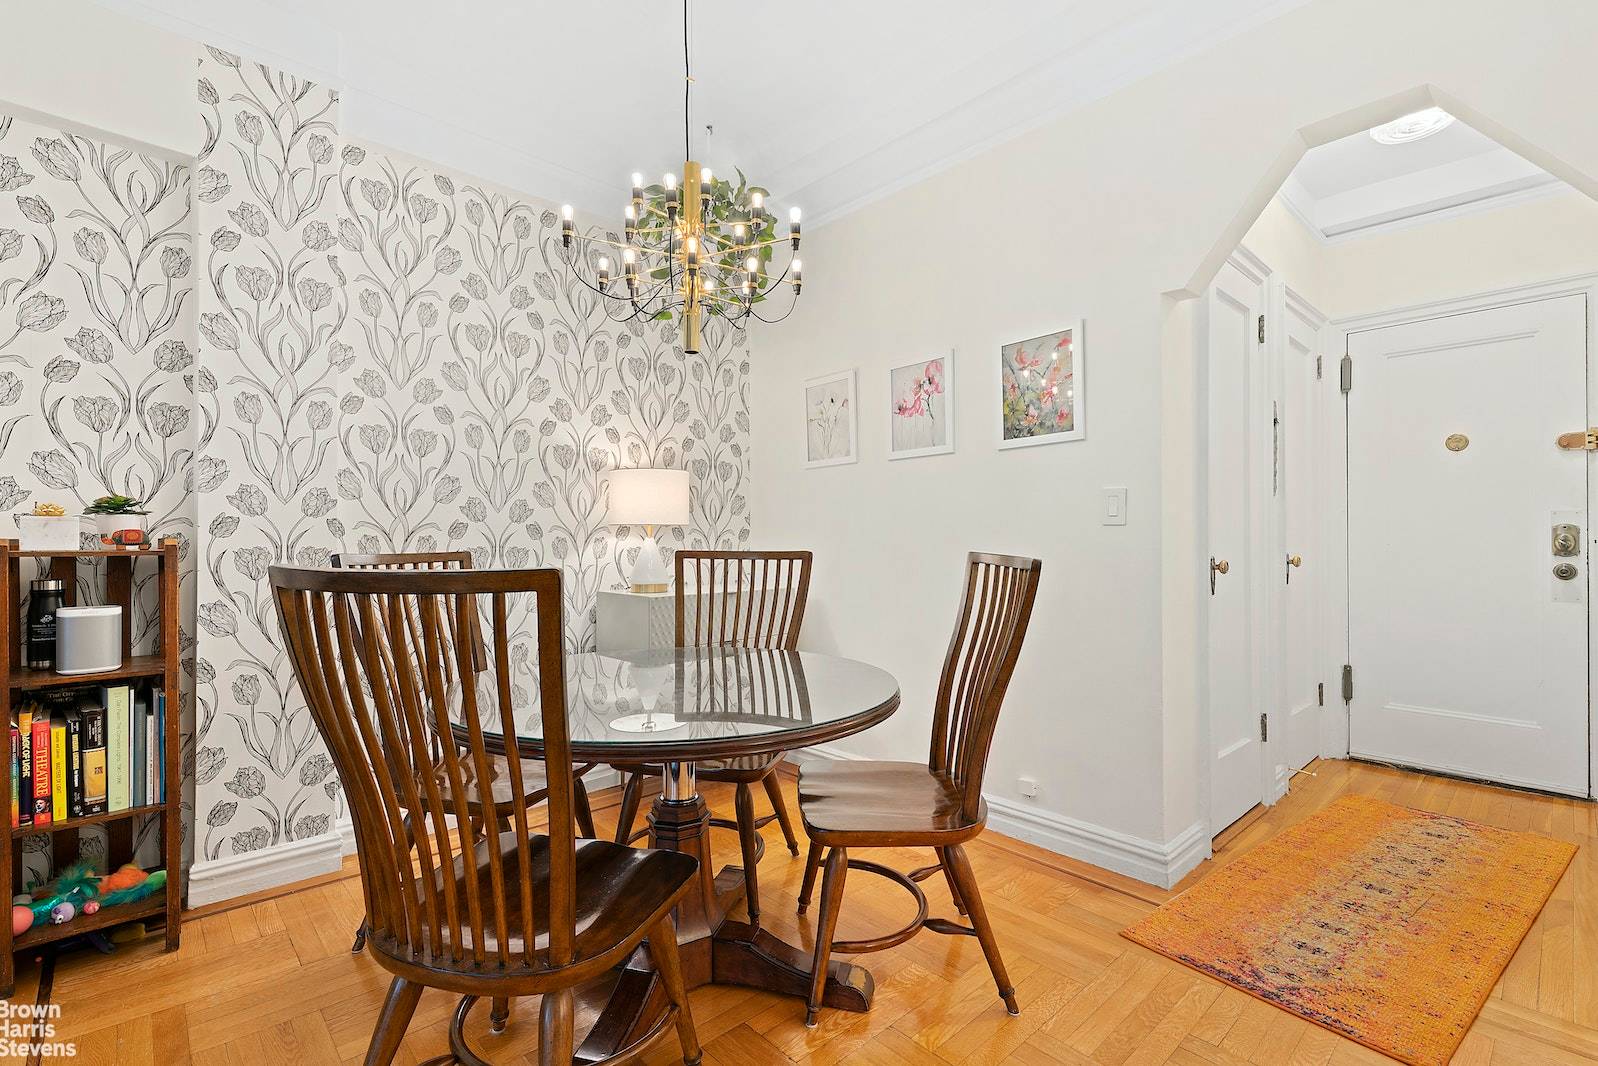 Completely renovated pre war co op now available in Manhattan's serene enclave of Hudson Heights.